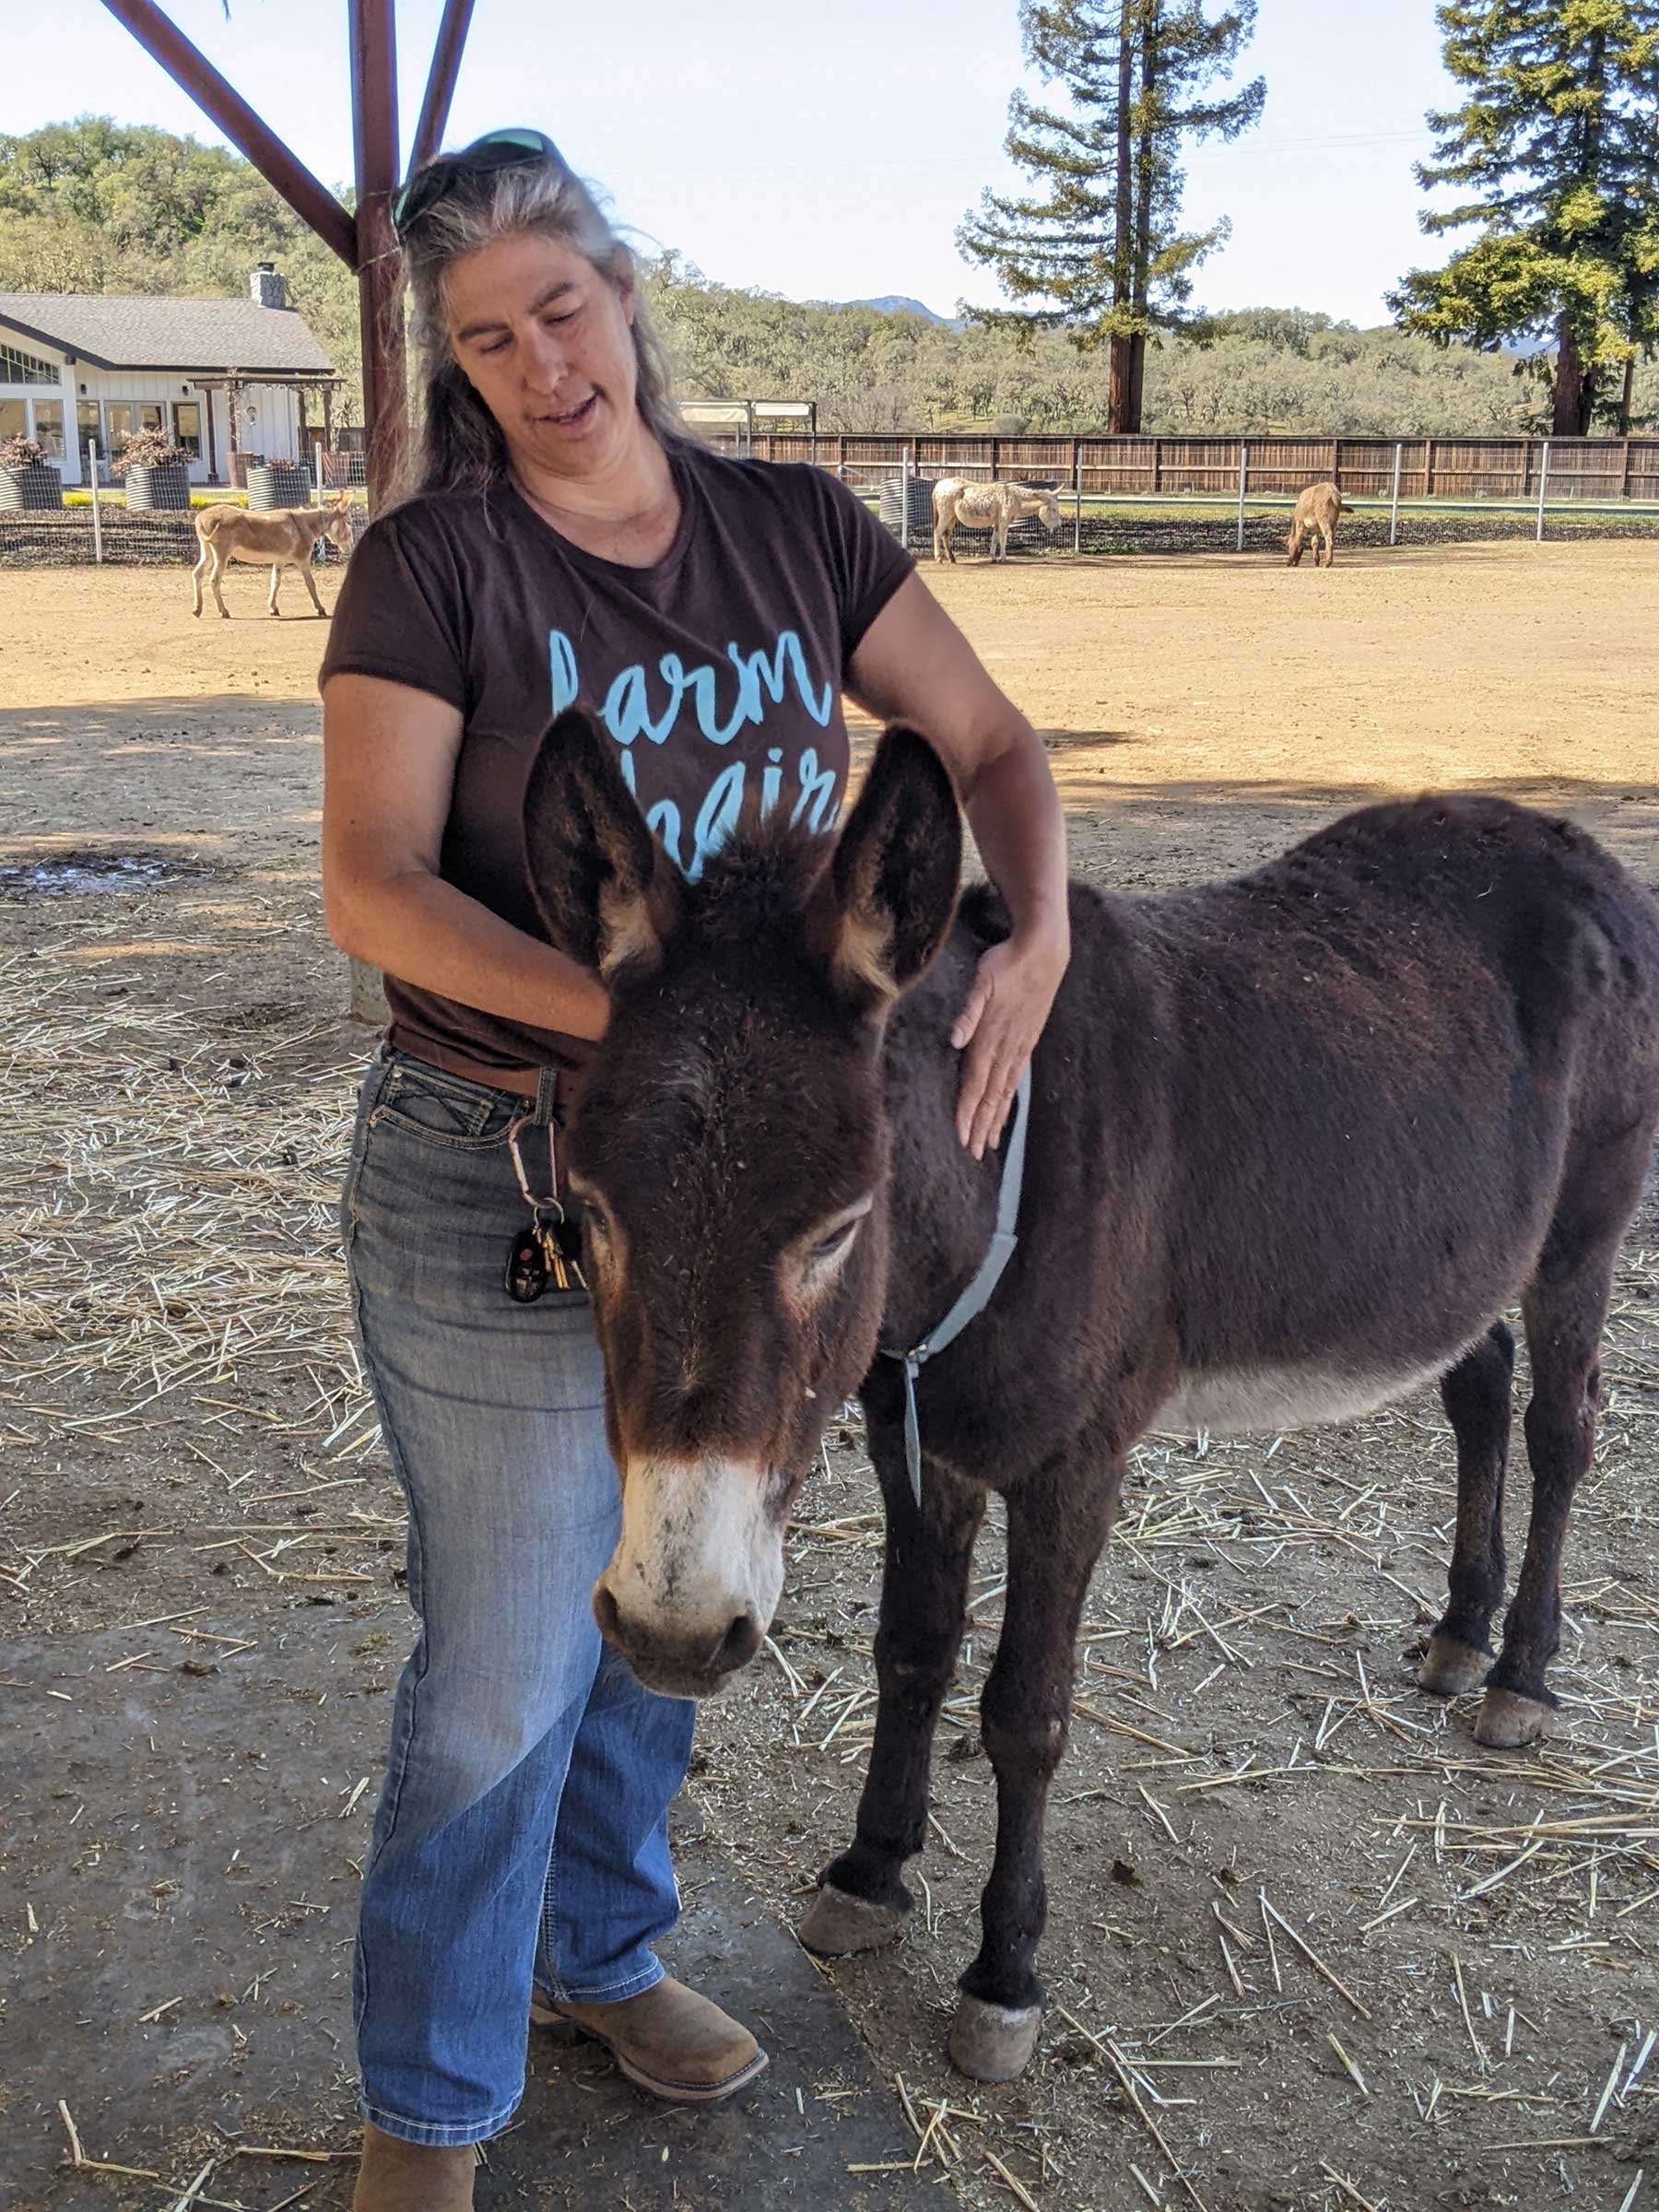 Staff and volunteers are affectionate with the donkeys to help restore their trust in humans.